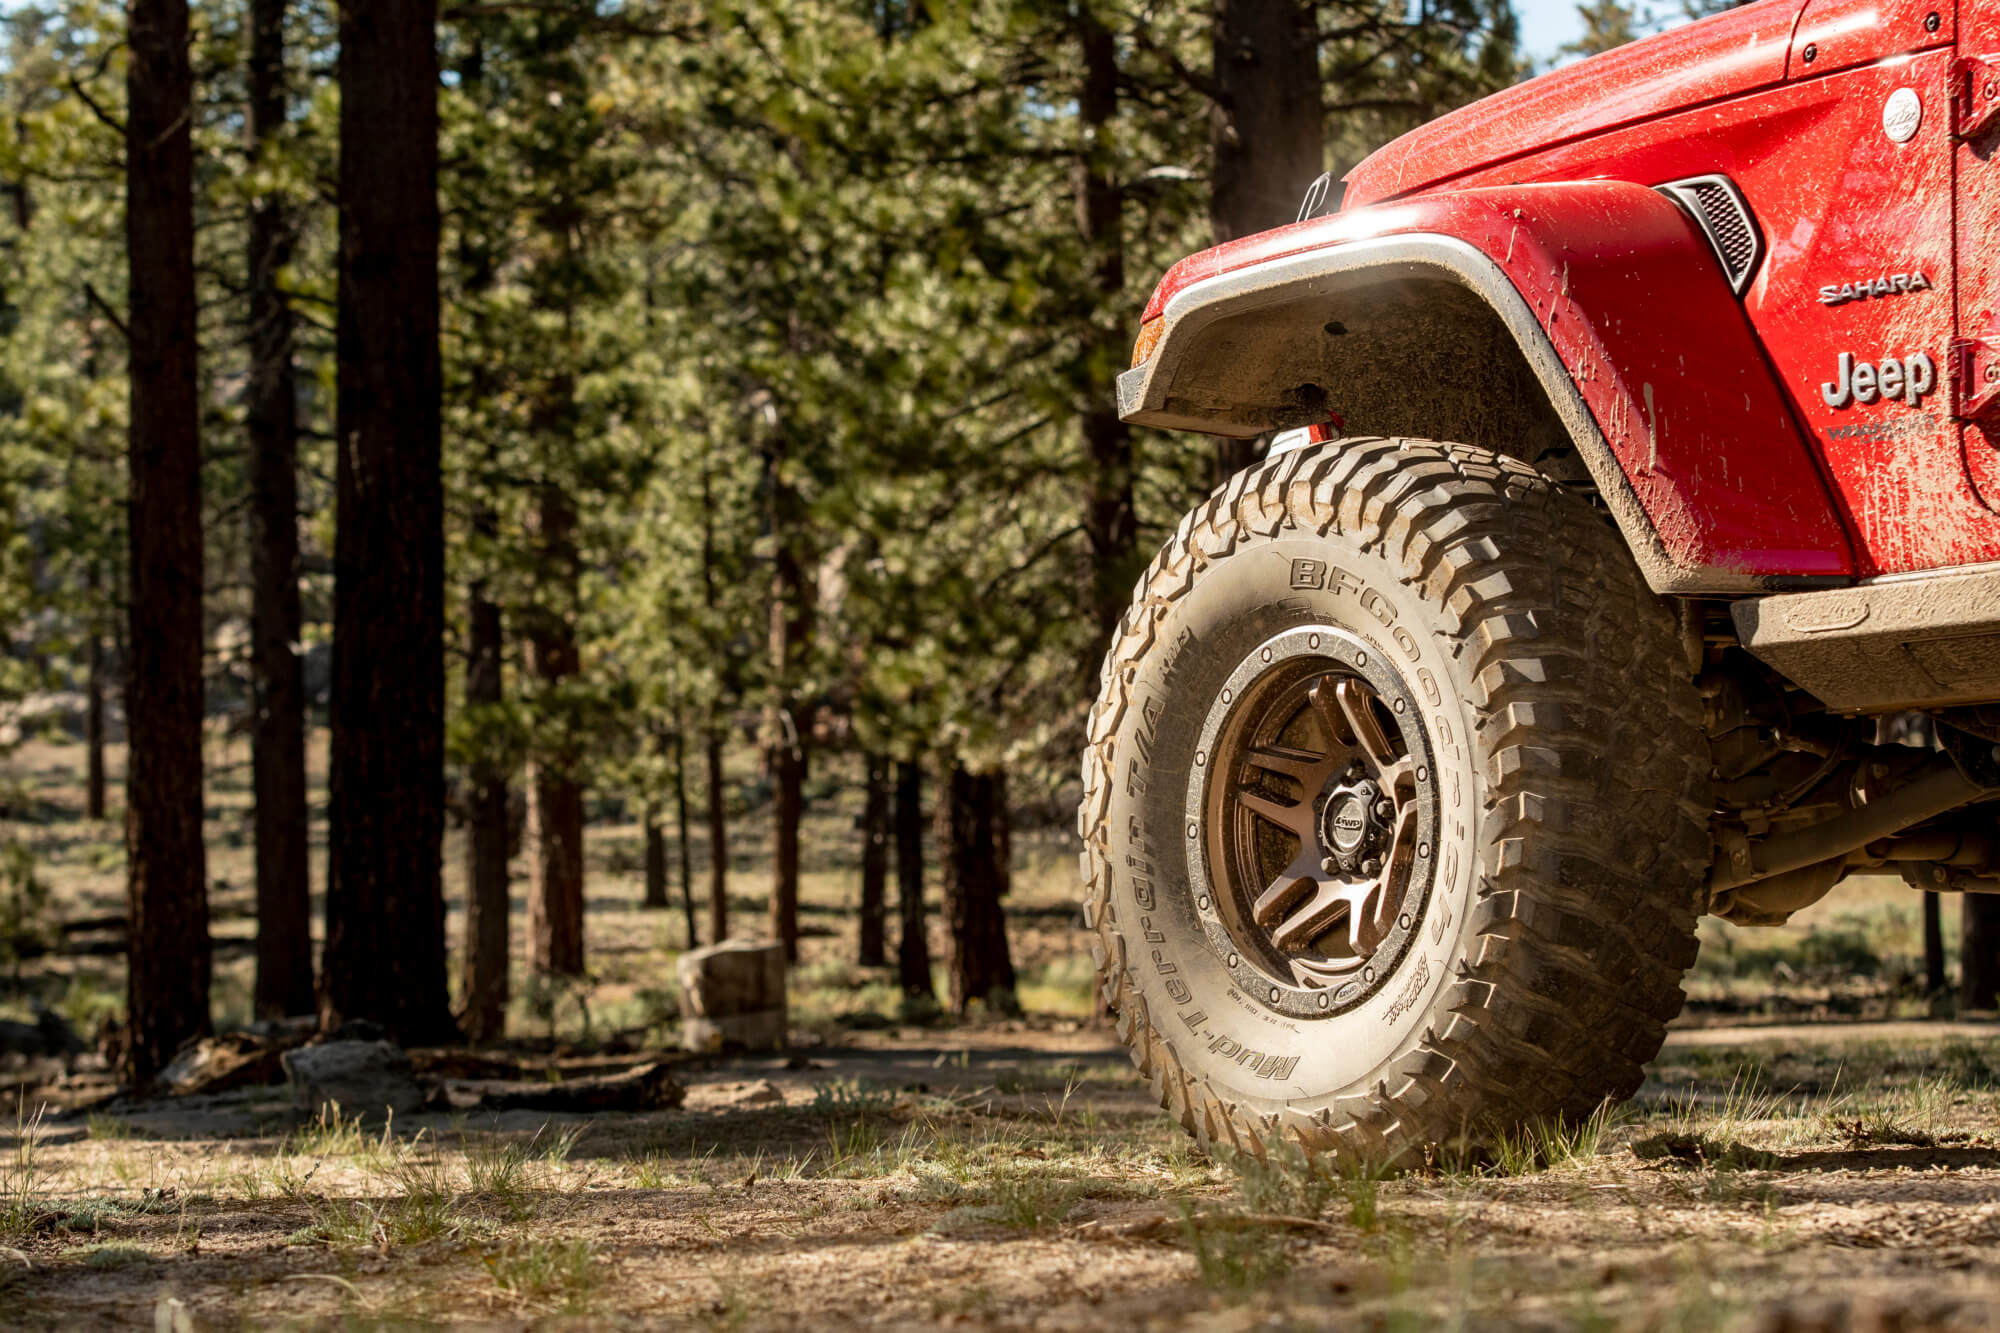 Jeep Wheel Compatibility Explained: Wheel Fitment - The Dirt by 4WP